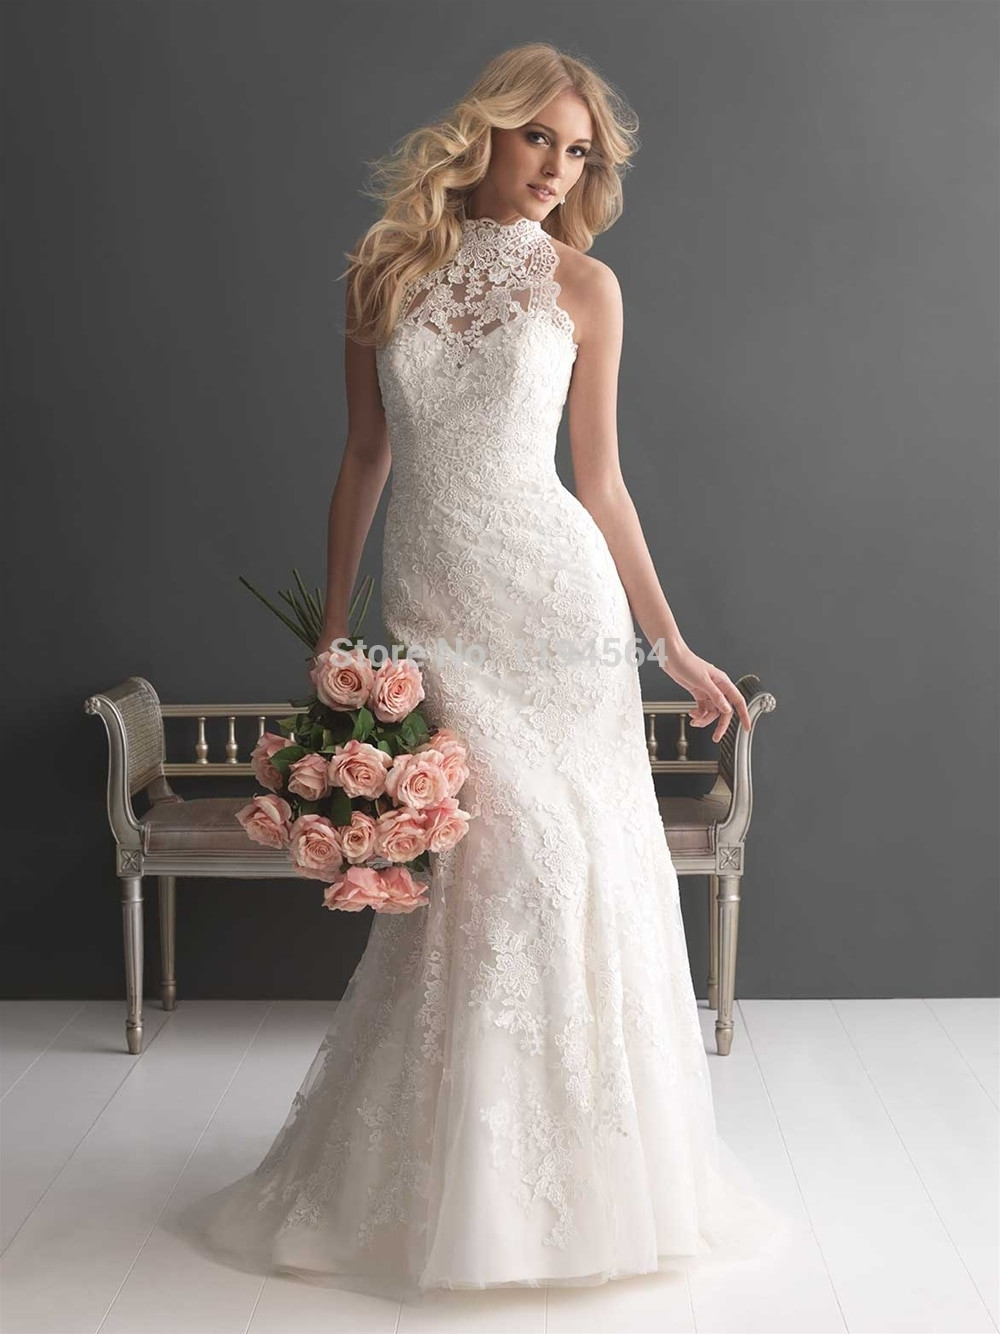 Lace Top Wedding Dress
 China Wedding Dresses Halter Lace Top Bridal Gown 2015